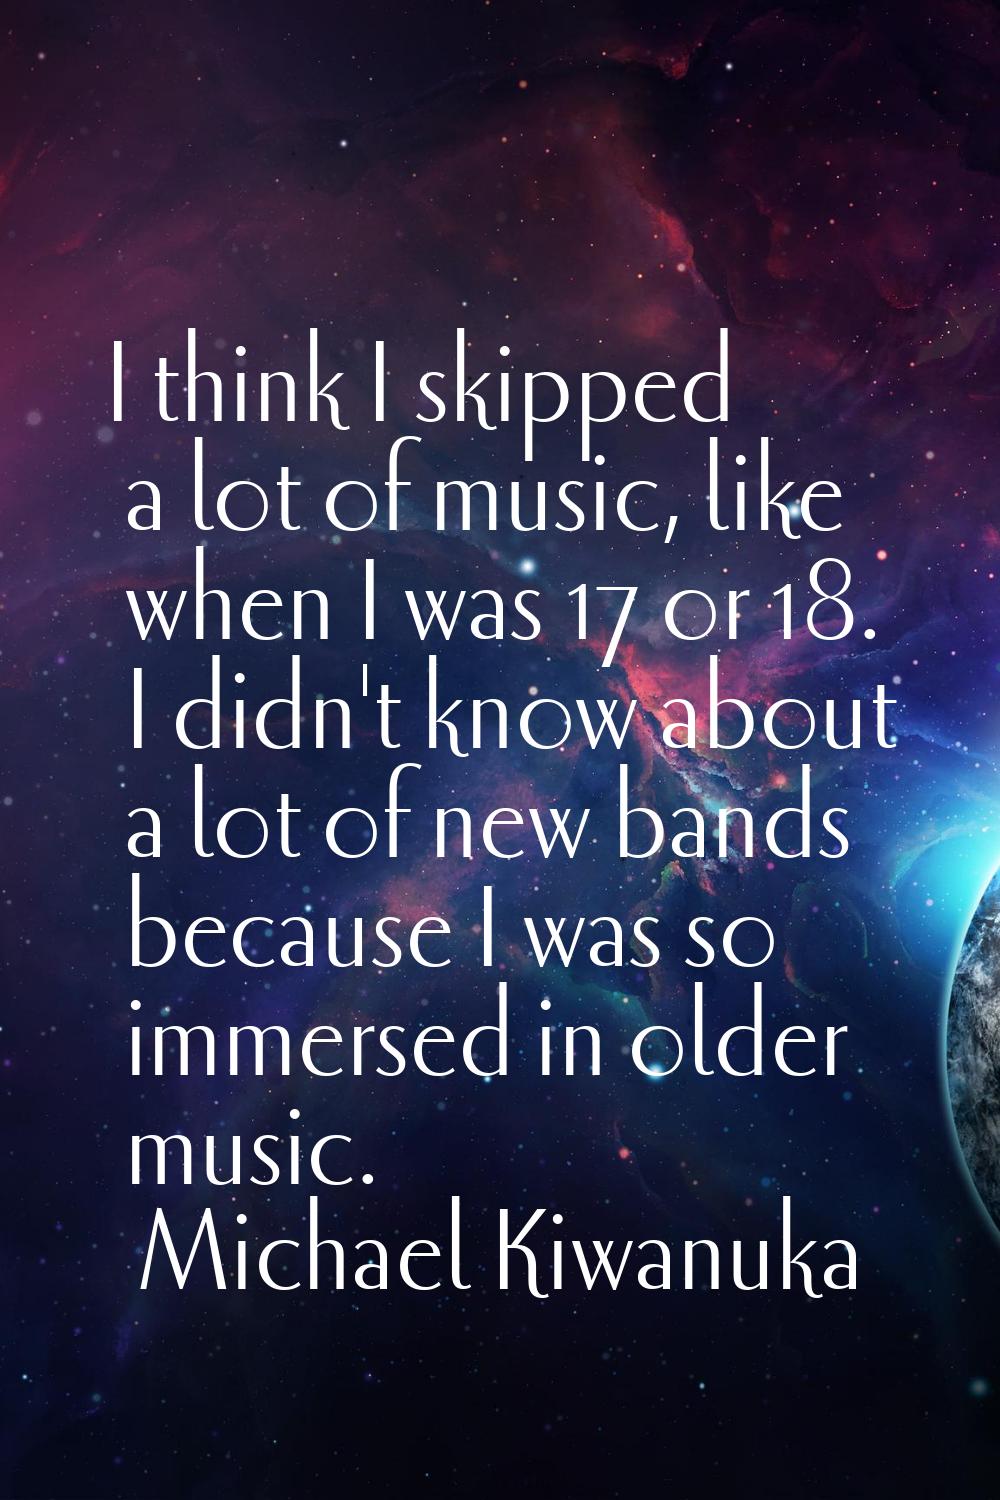 I think I skipped a lot of music, like when I was 17 or 18. I didn't know about a lot of new bands 